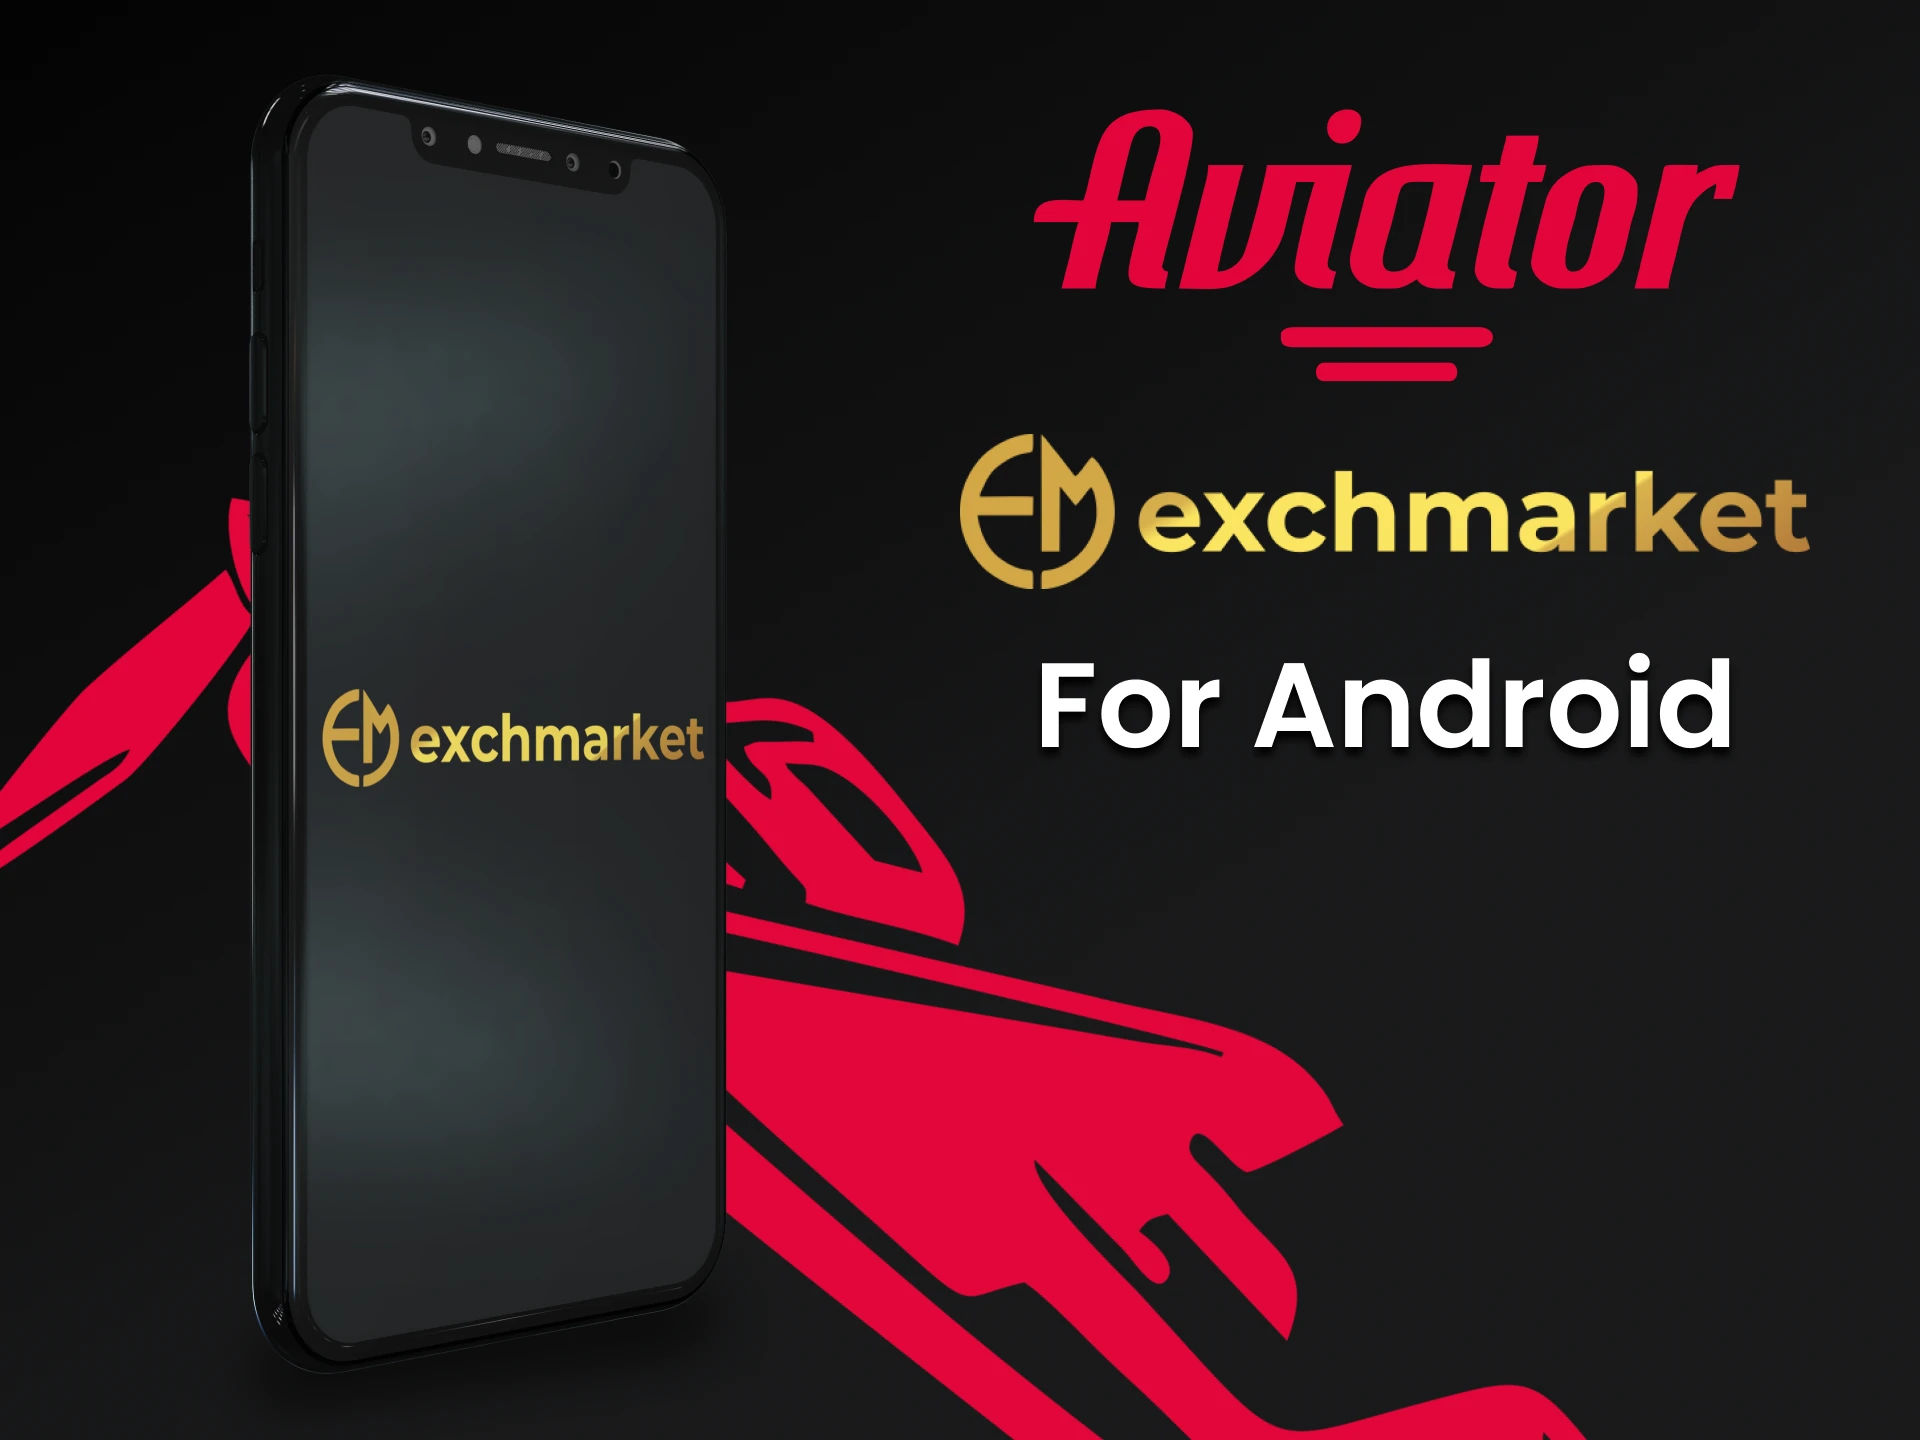 Install the Exchmarket Android device app to play Aviator.